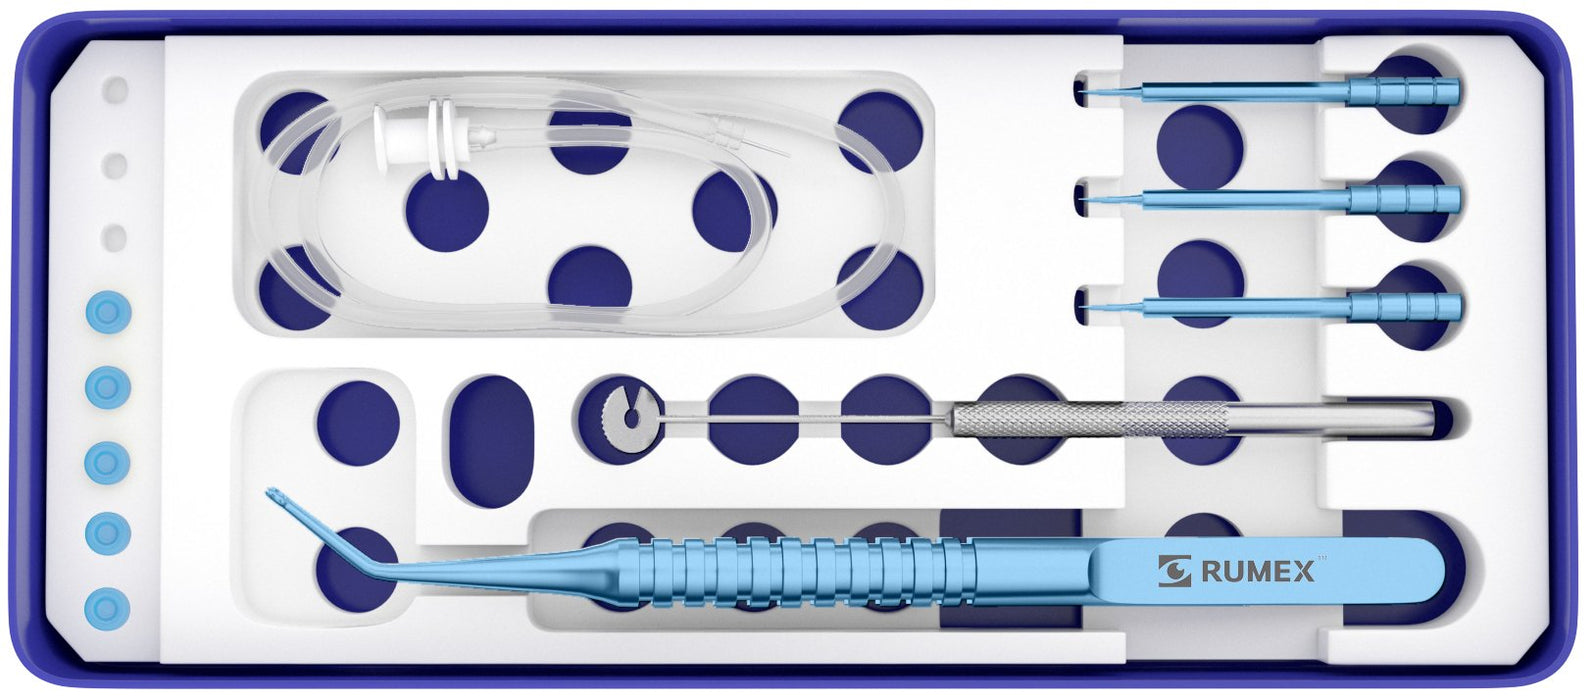 Manipulation tongs to handle the vials remotely - Medisystem